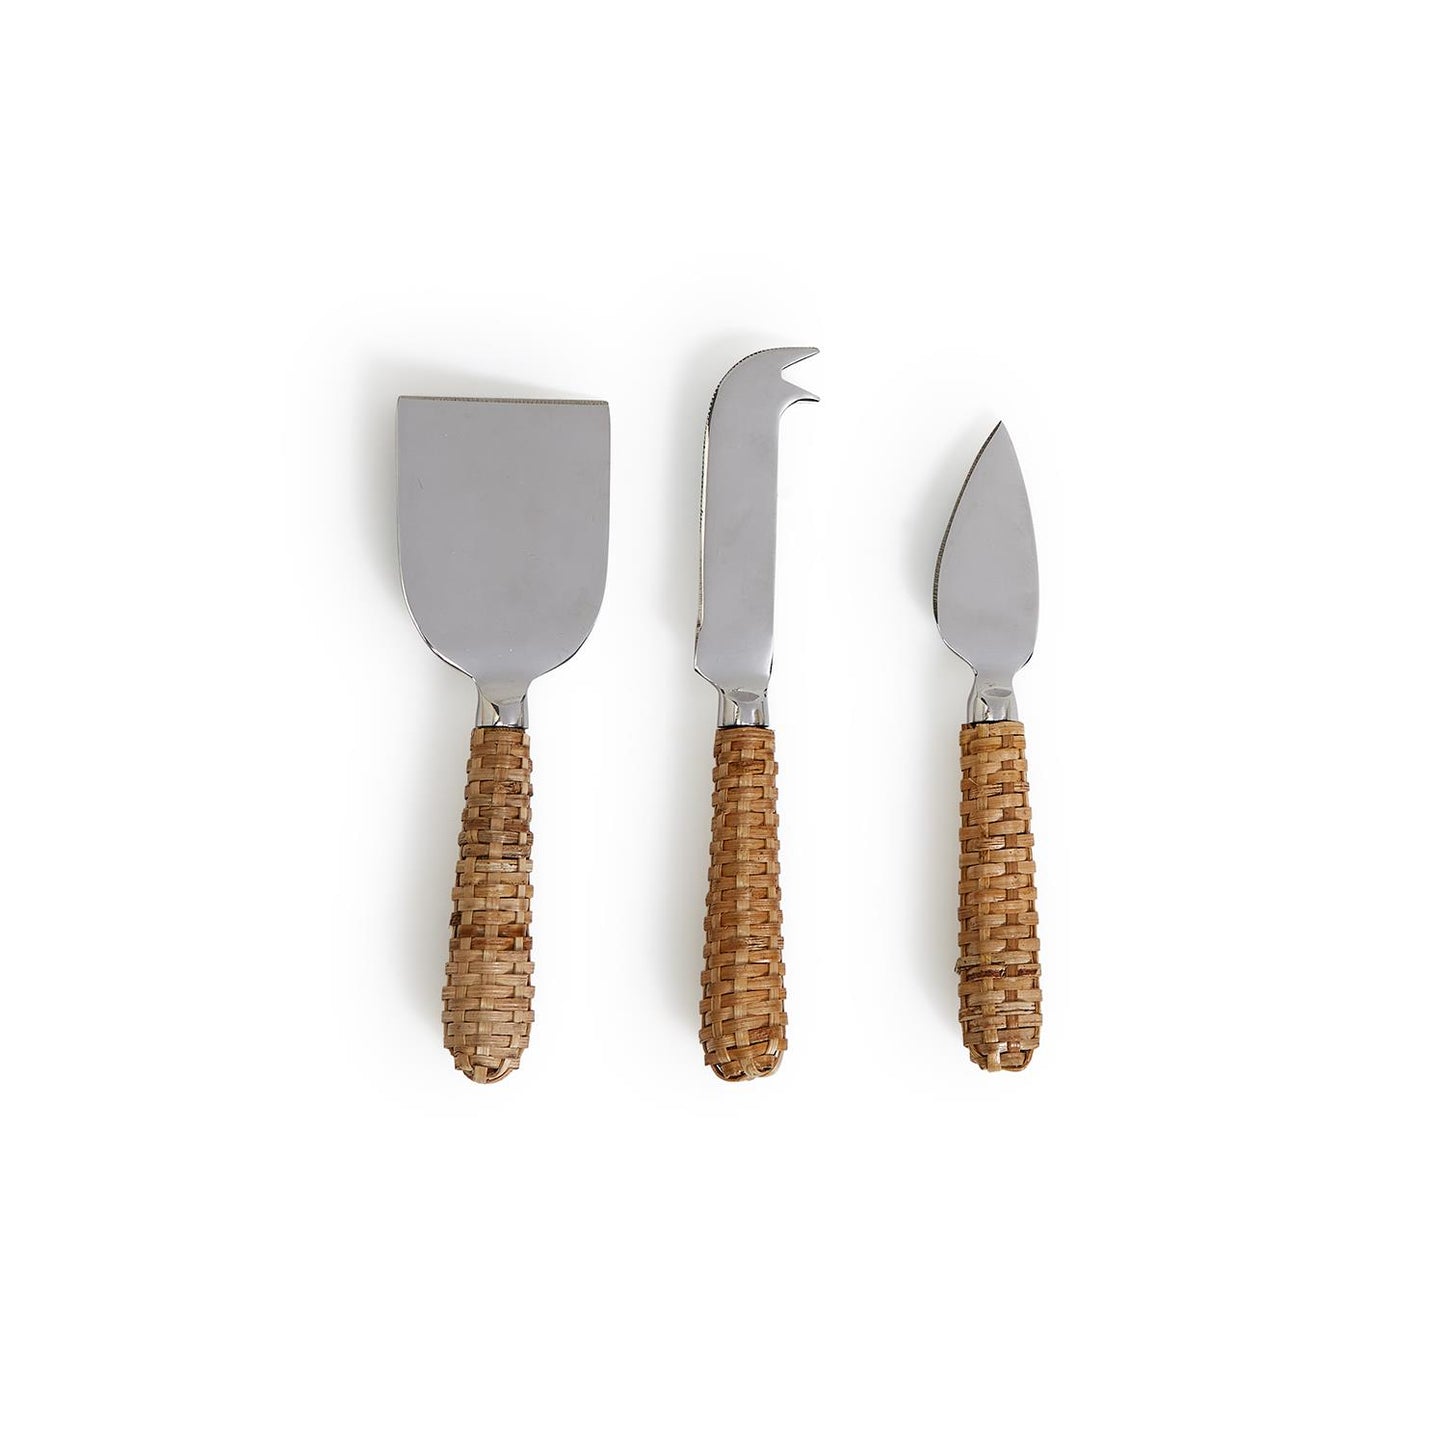 Wicker Weave Set of 3 Cheese Knives